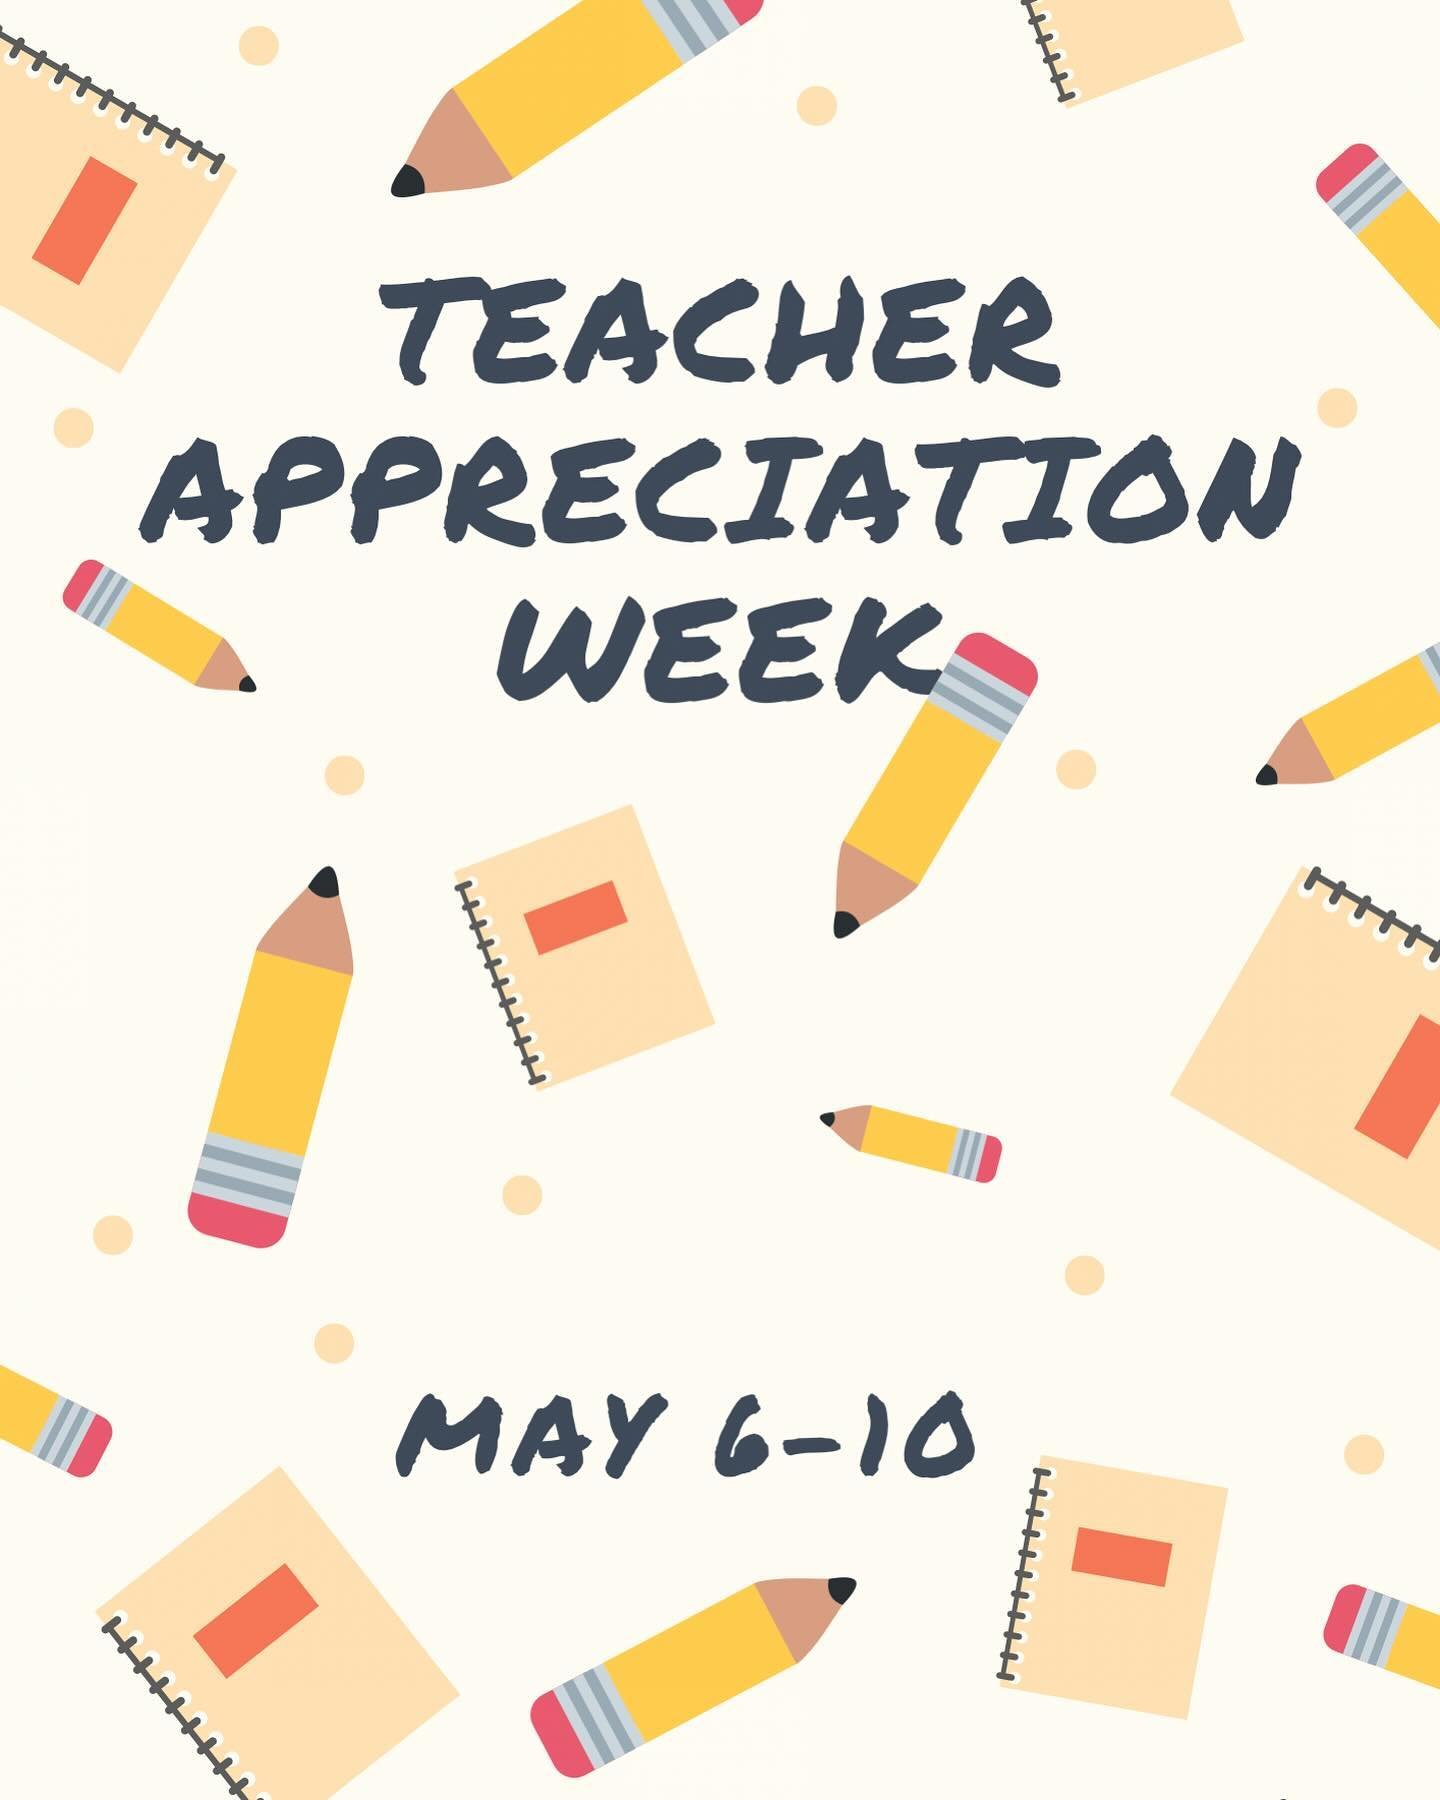 What better way to say thank you to your favorite teachers than a cup of coffee? Book MCMB for your favorite teachers today! #teacherappreciation #teacherappreciationweek #teacherswholift #mentor #teacherswhoread #detroitteachers 🧑&zwj;🏫 ☕️ 📕